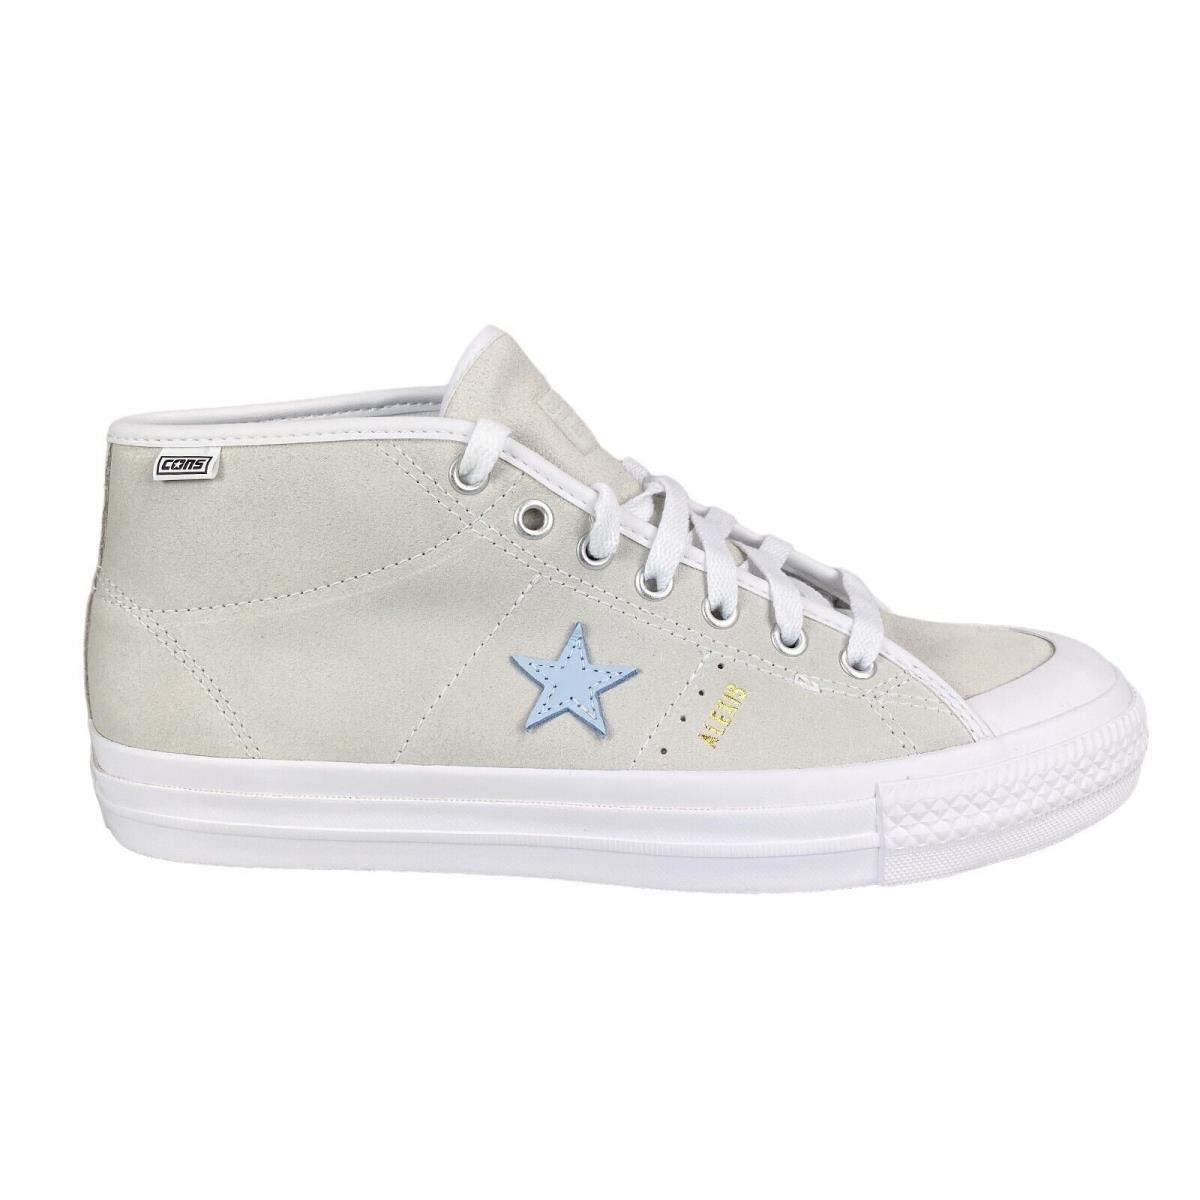 Converse Cons x Alexis Sablone One Star Pro Mid Skate Shoe 171326C